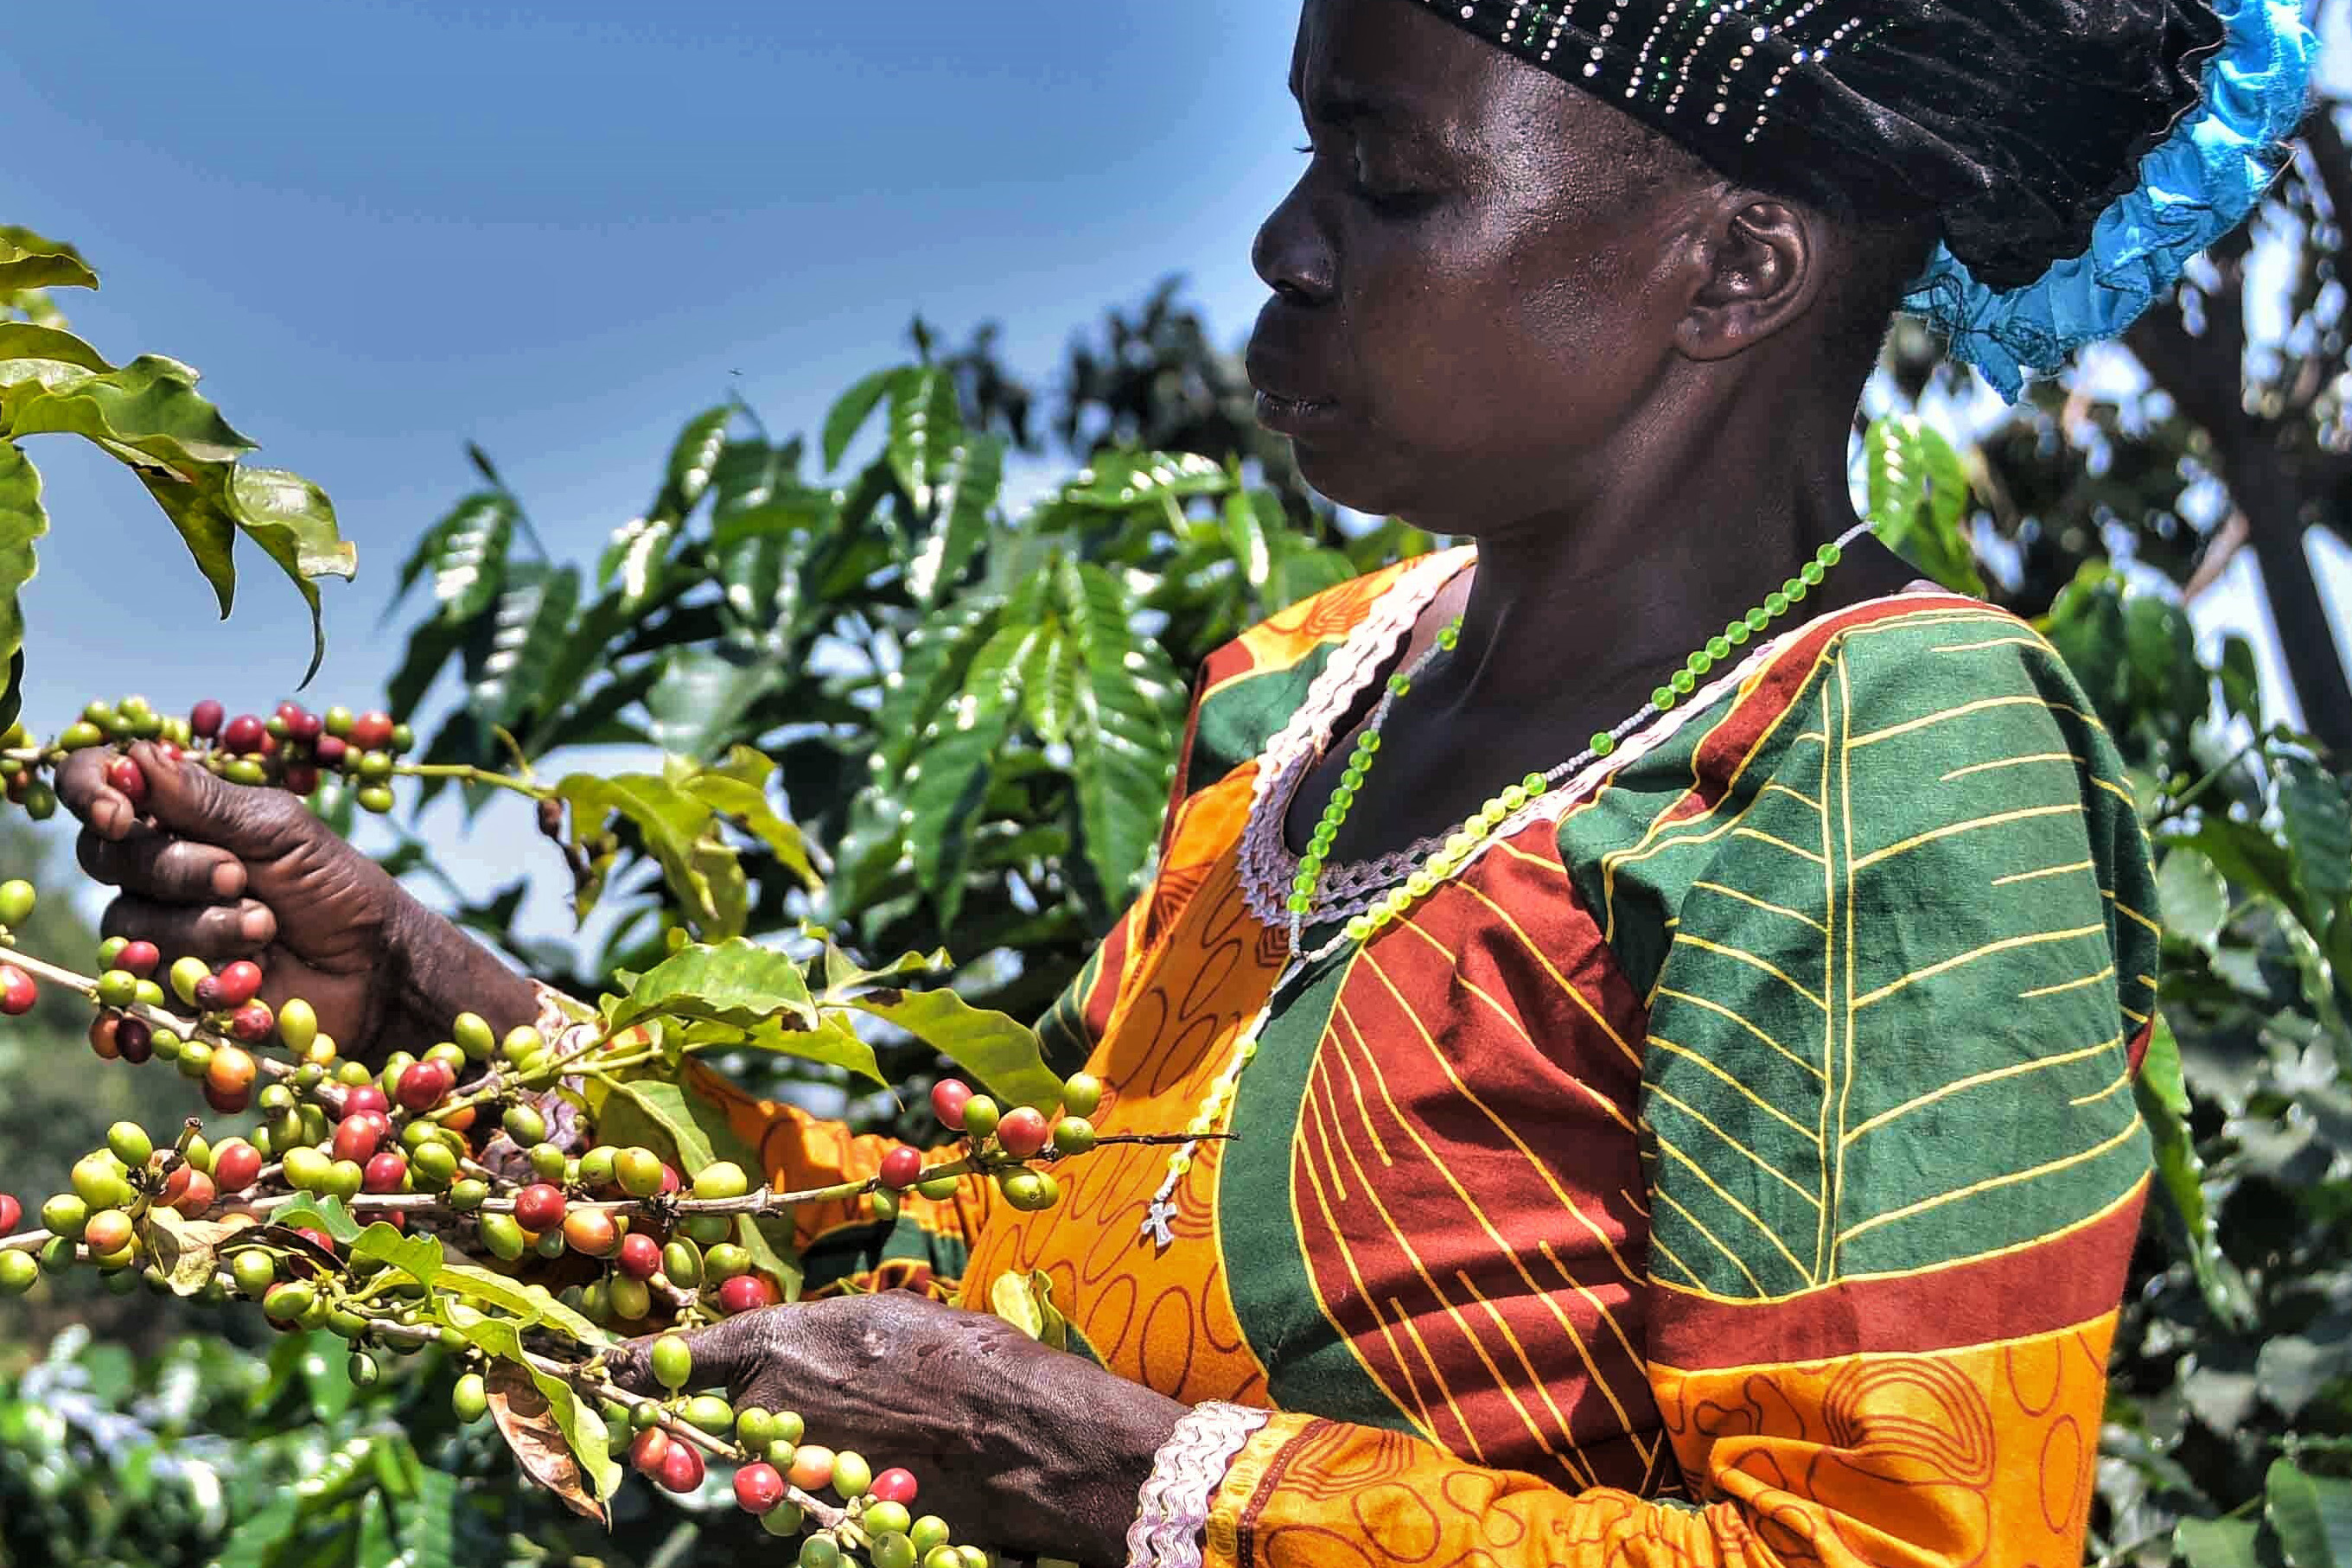 InfoPoint conference: Insights into the coffee supply chain. A multifaceted reality